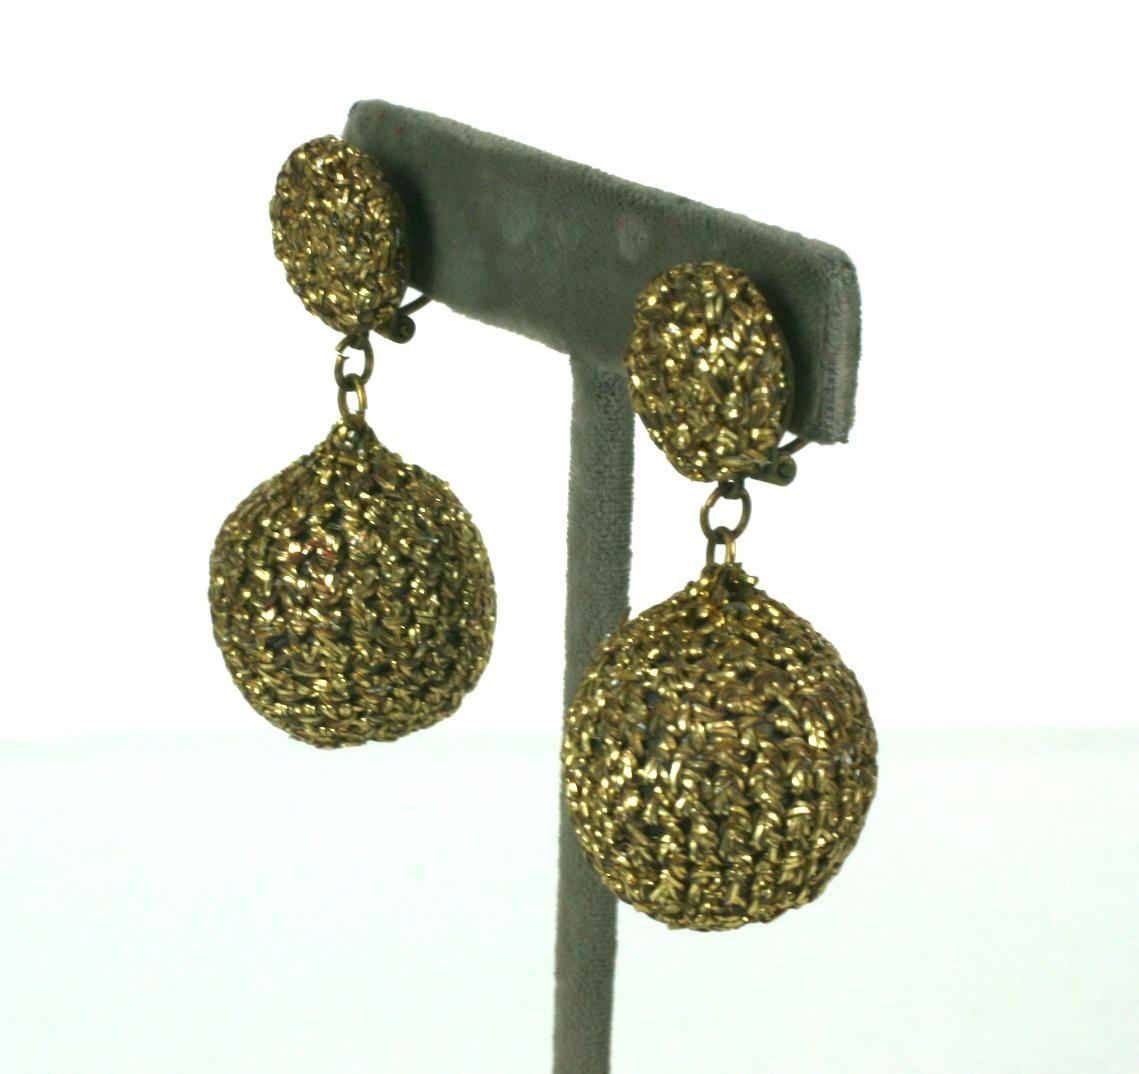 Lina Baretti unusual knitted gold metallic cord drop earclips. The knitted gold cord made to imitate pierced metal filigrees.  Composed of a round gold hand knit cabochon, suspending a large gold hand knitted round drop.
Lina Baretti created